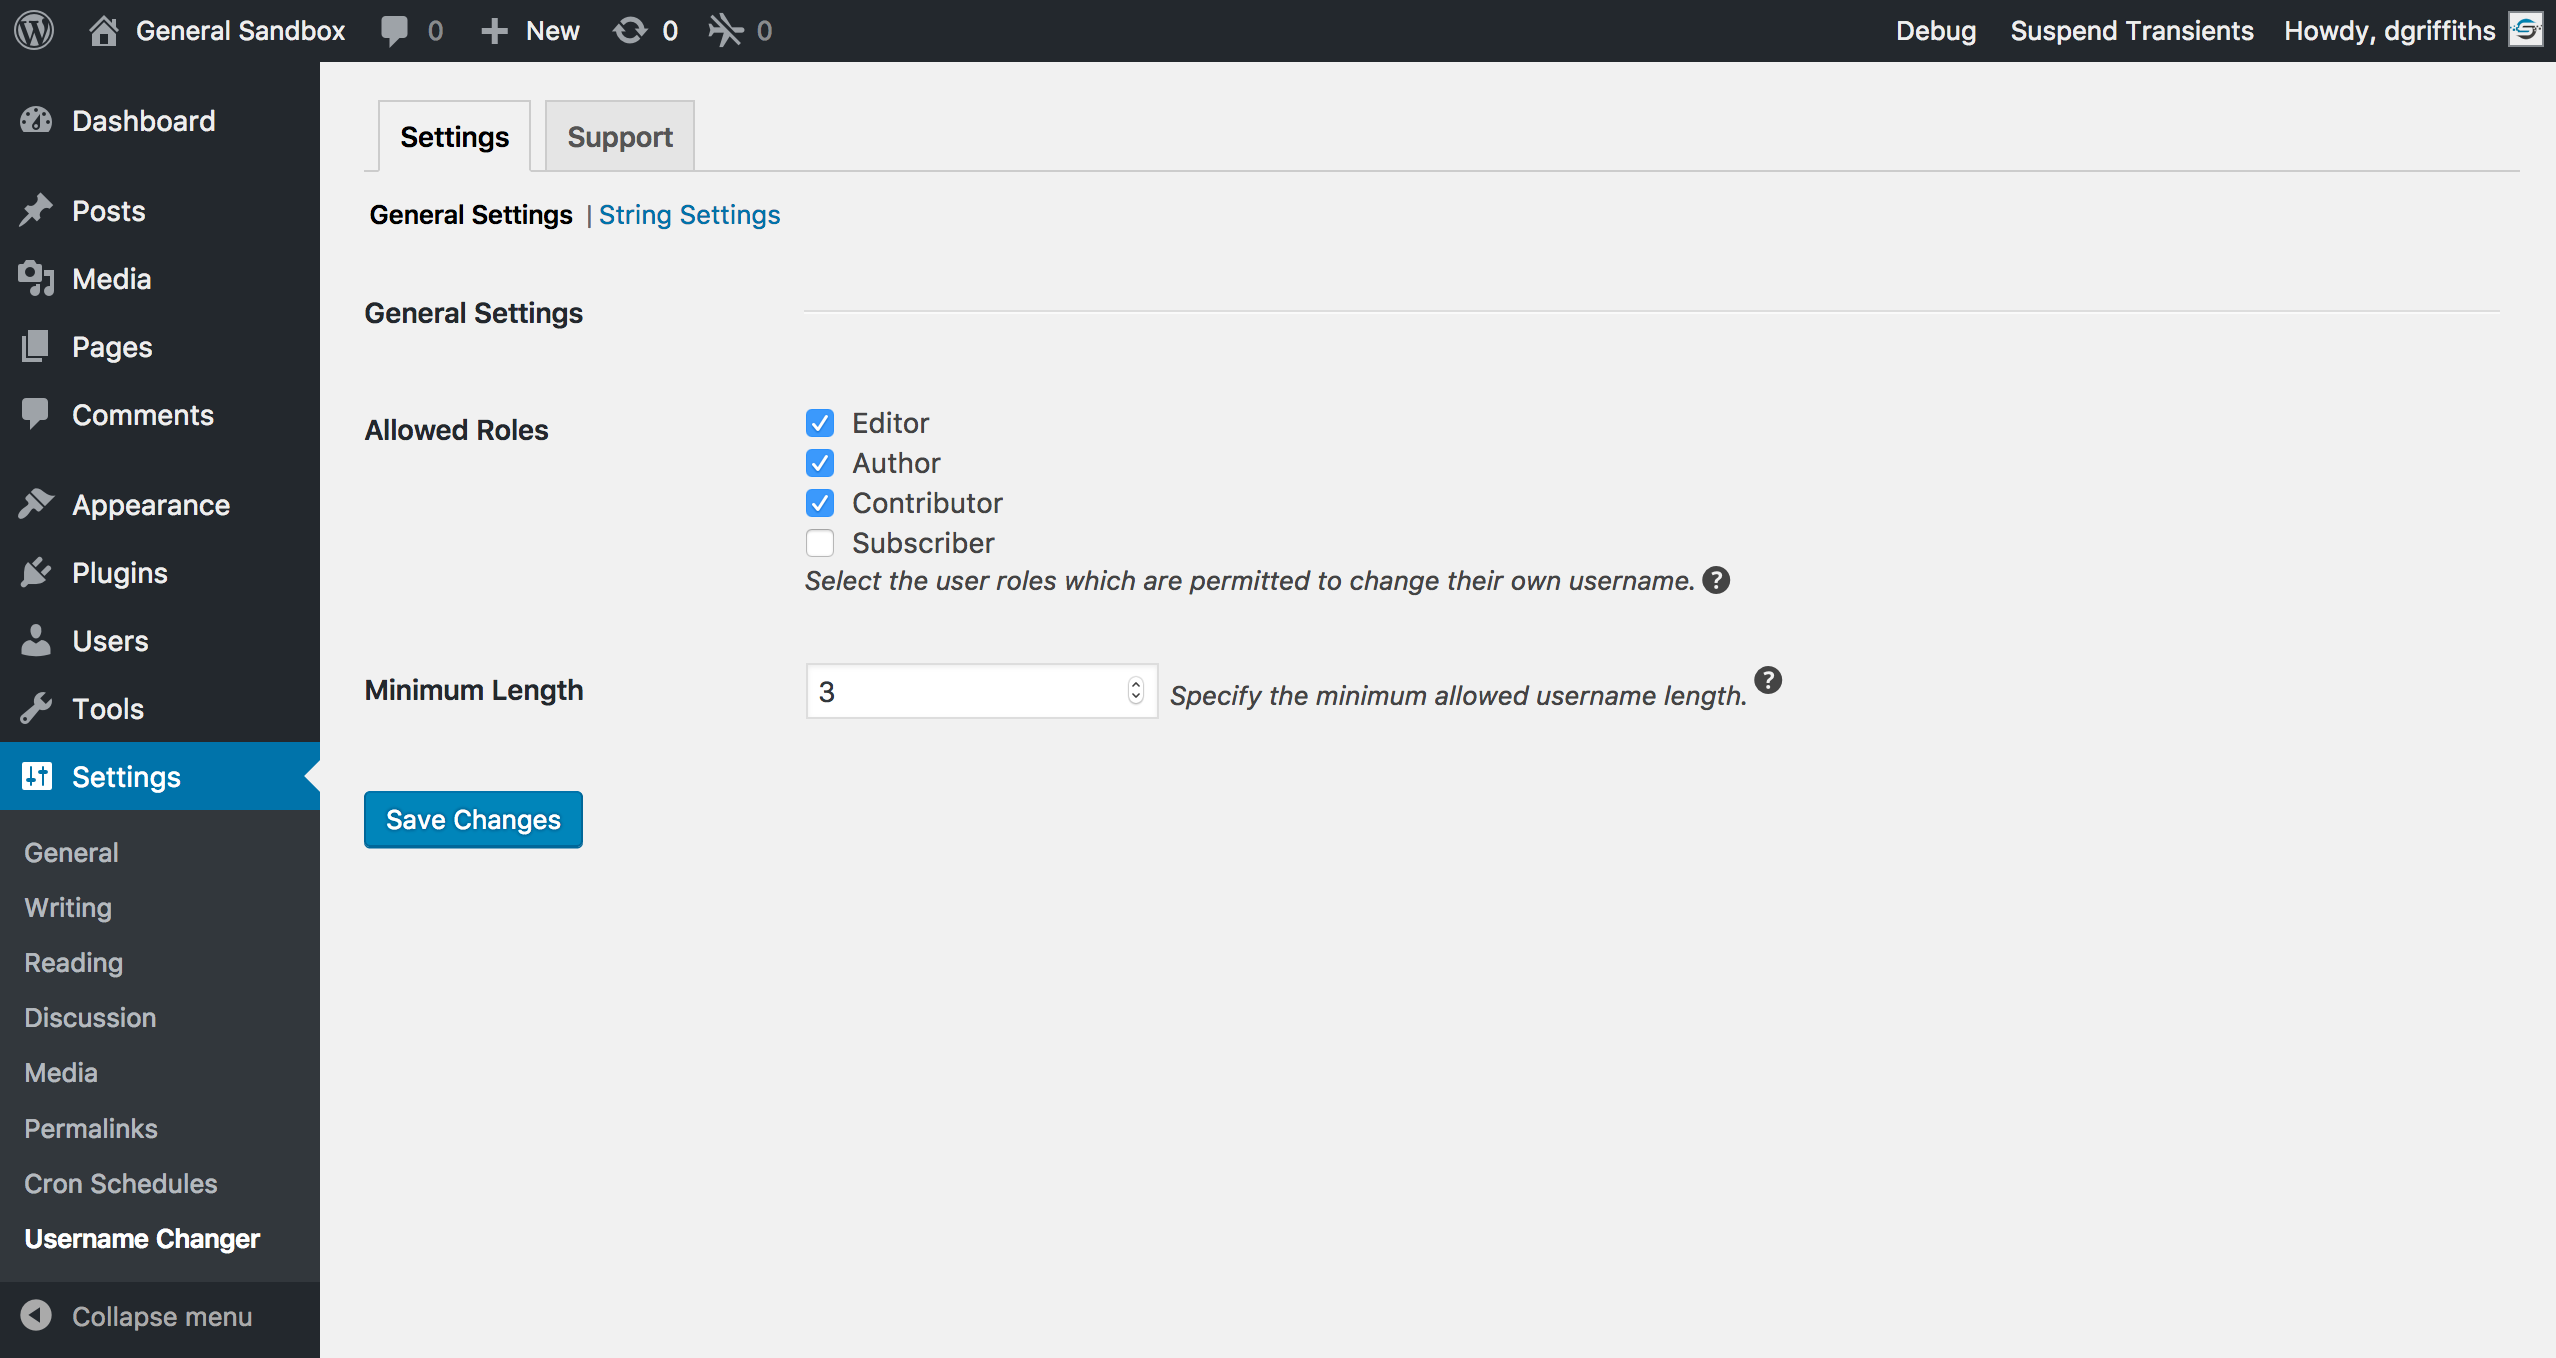 Settings Panel: The settings panel allows you to configure username rules and message strings.